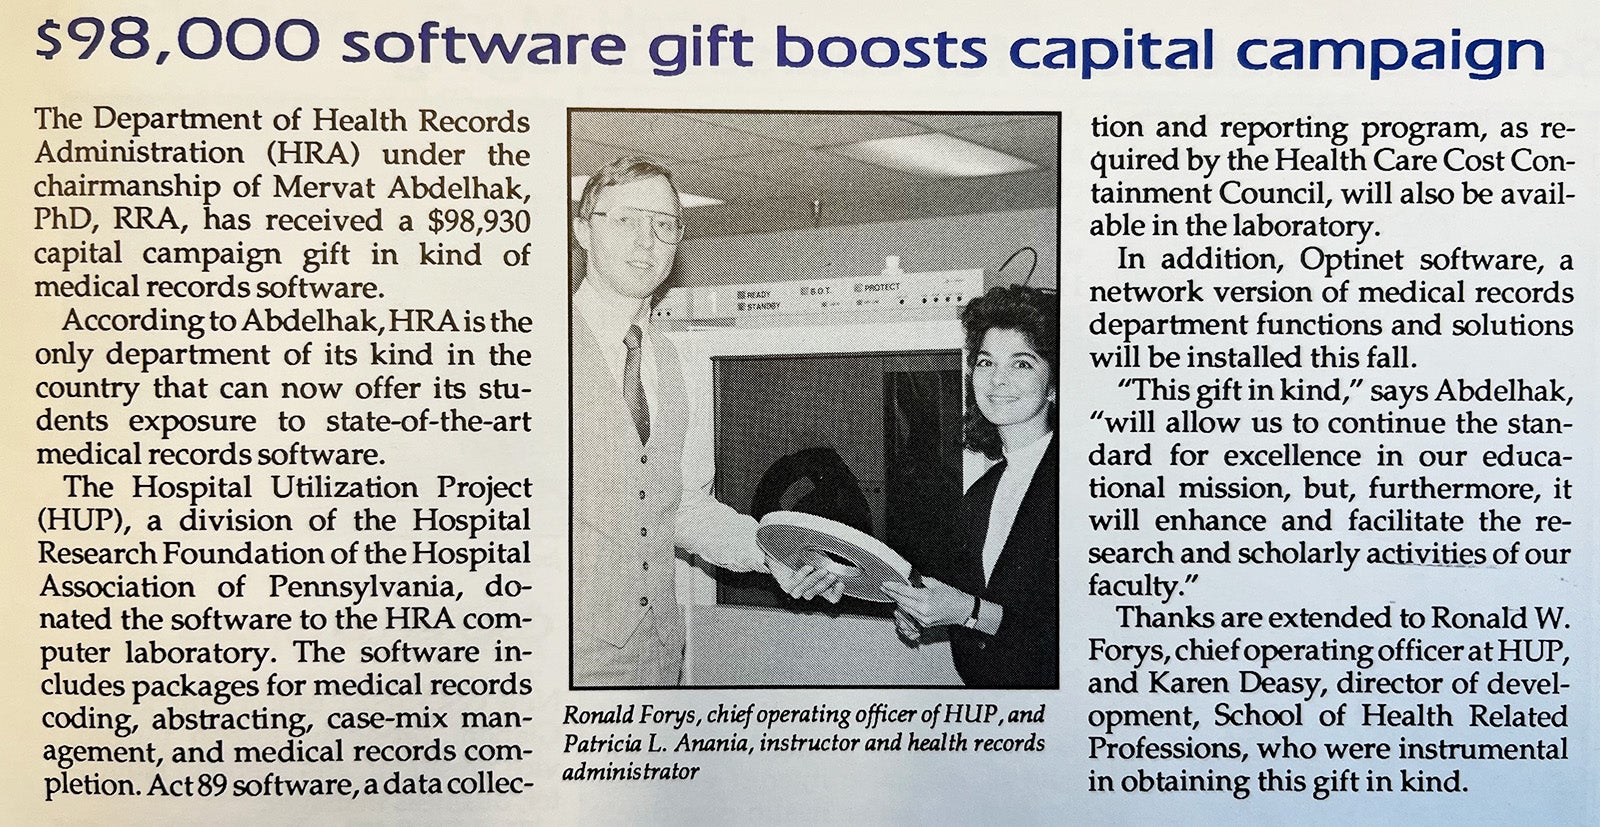 Anania-Firouzan featured in the 1988 School of Health Related Professions (precursor to SHRS) newsletter